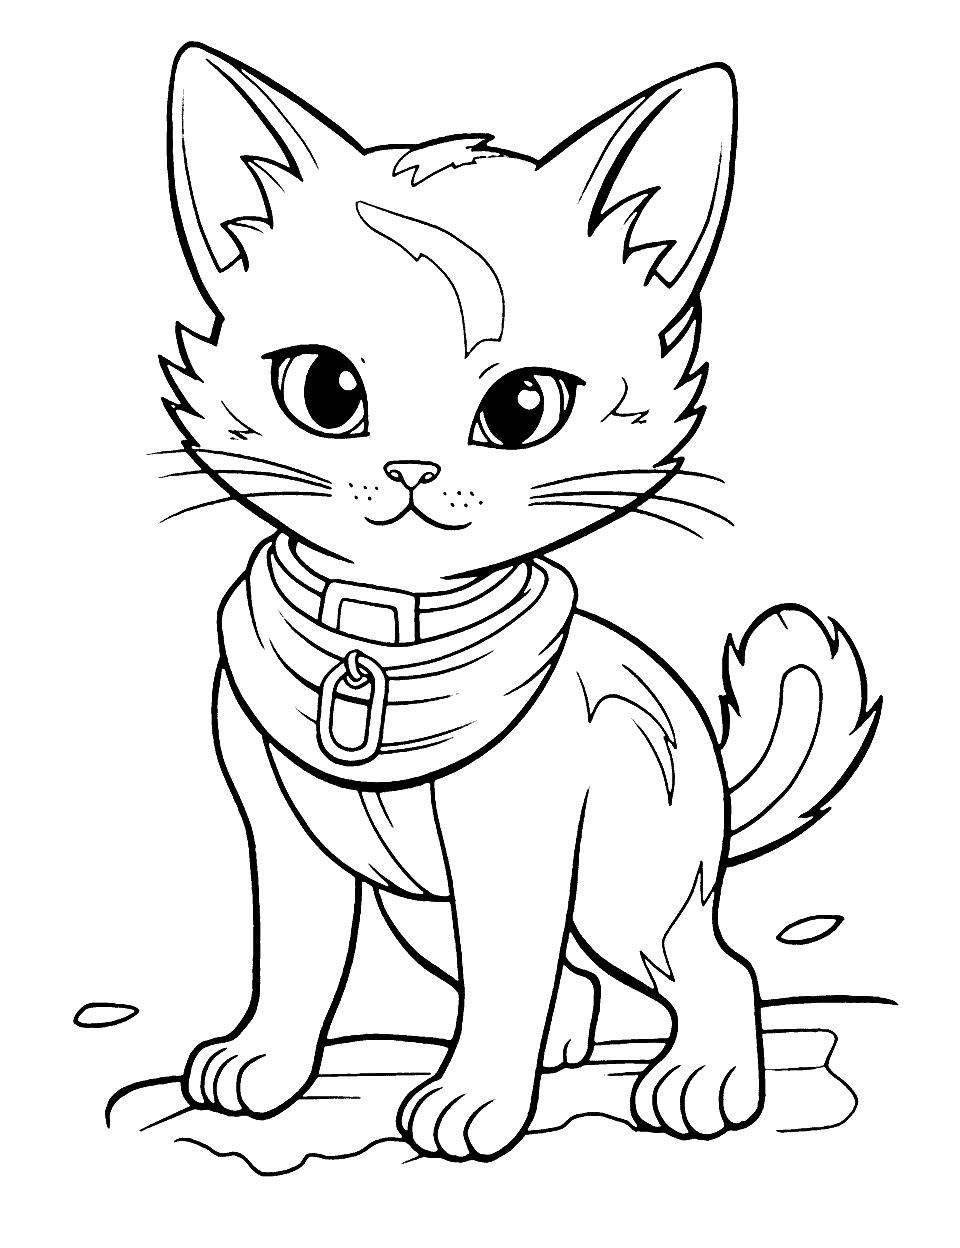 Warrior Clan Cat on a Mission Coloring Page - A strong and brave warrior cat from the popular book series, on a secret mission for its clan.